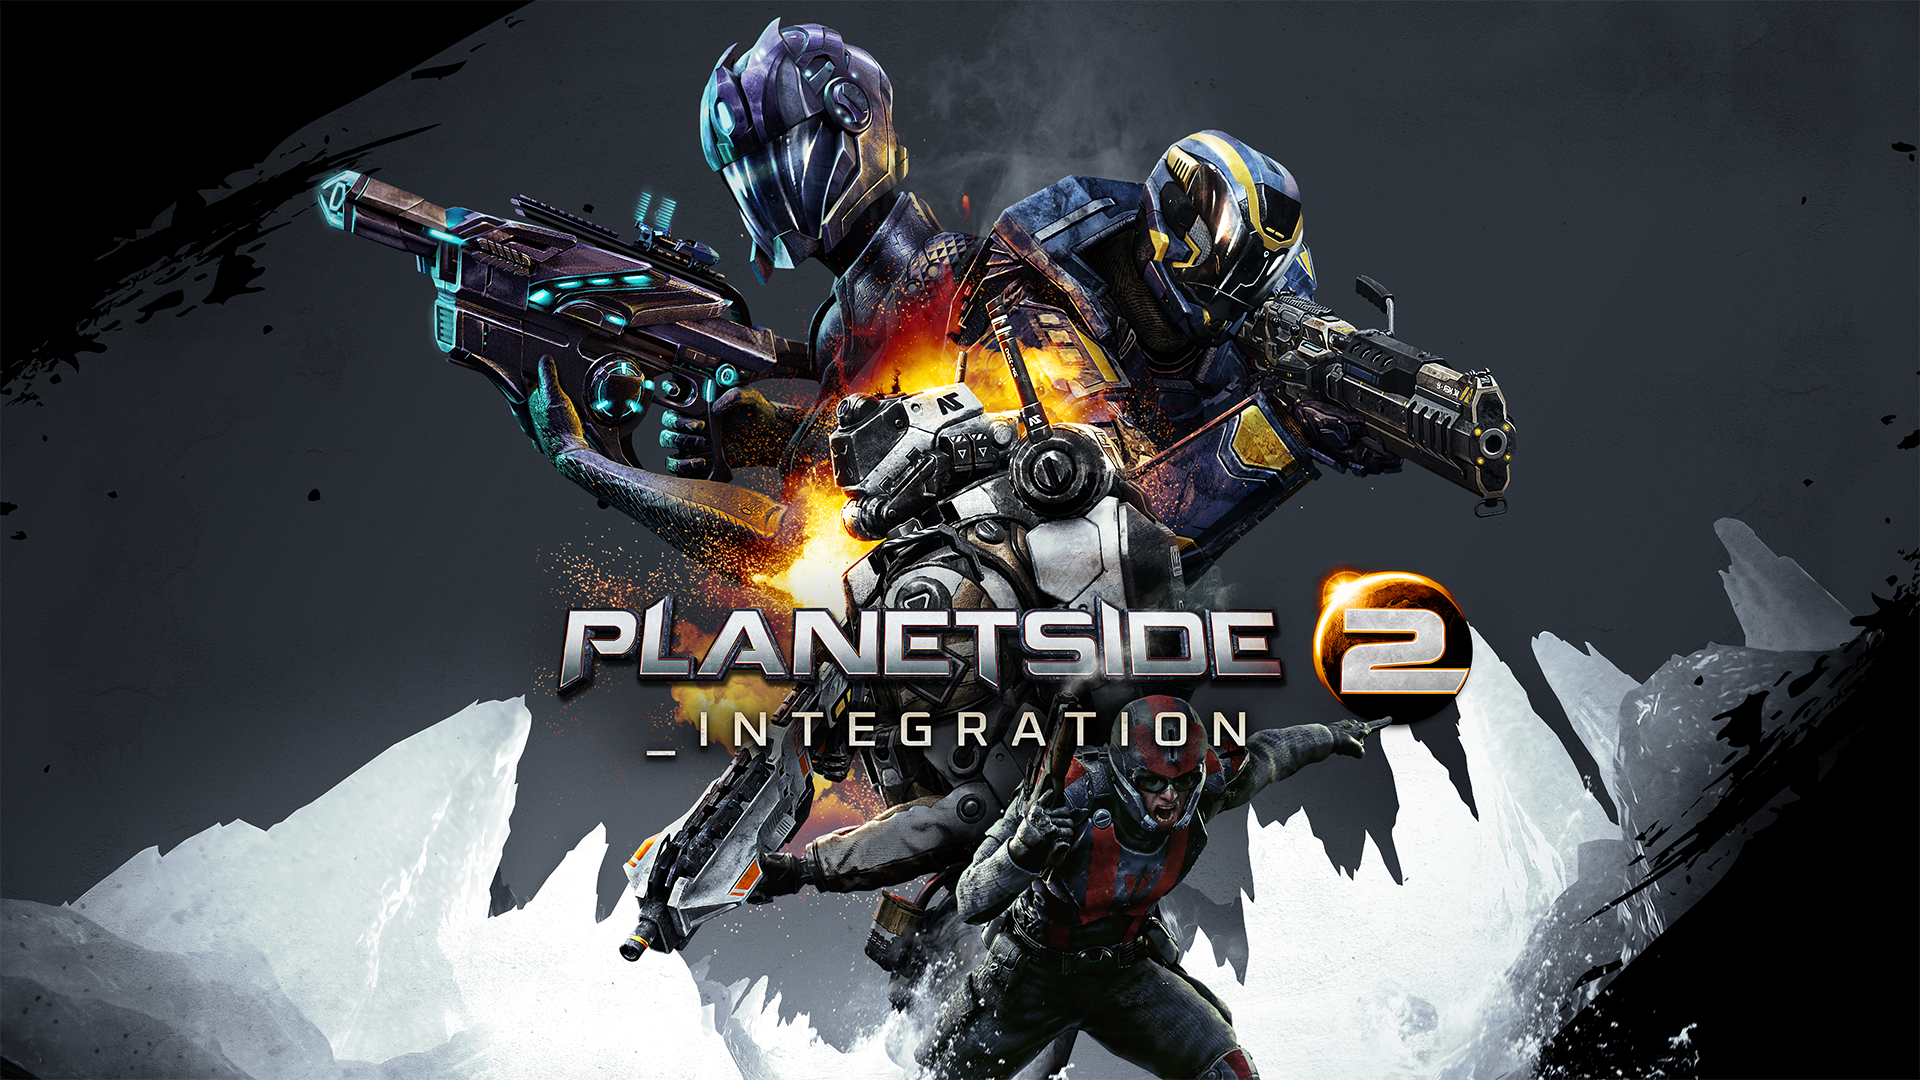 _Integration hits PS4, August 25th